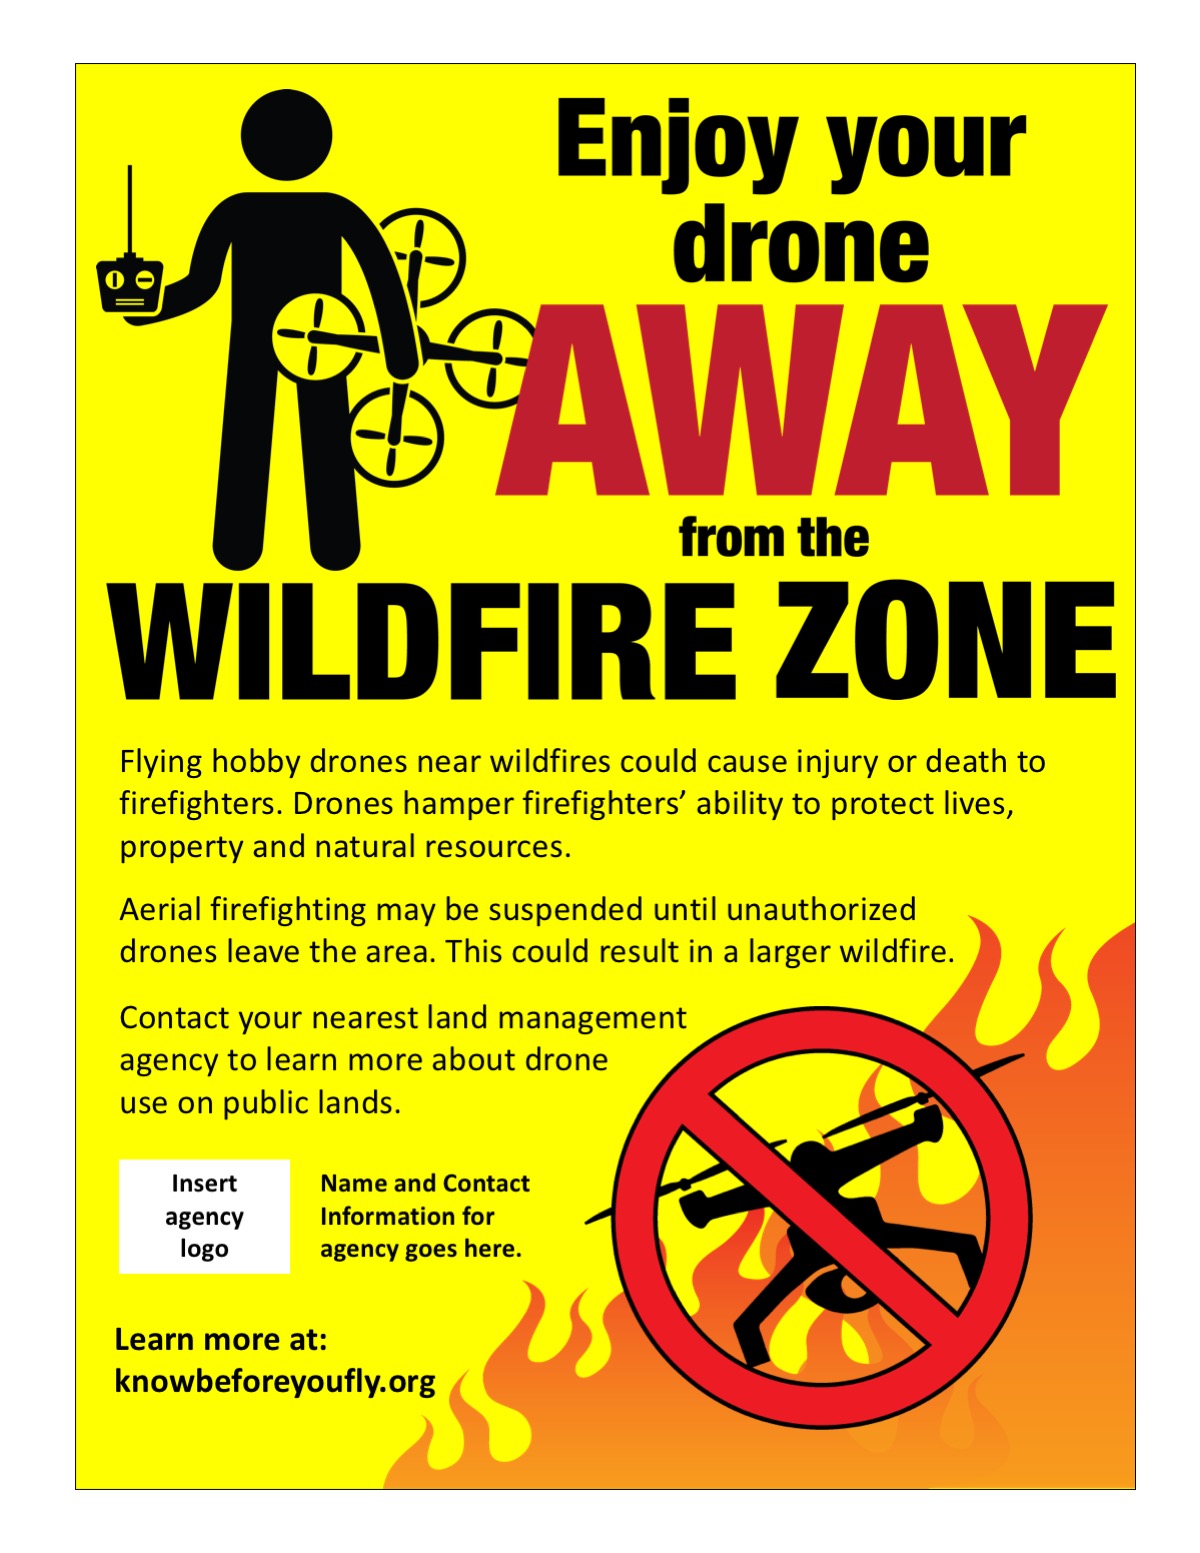 Enjoy your drone away from the wildfire zone